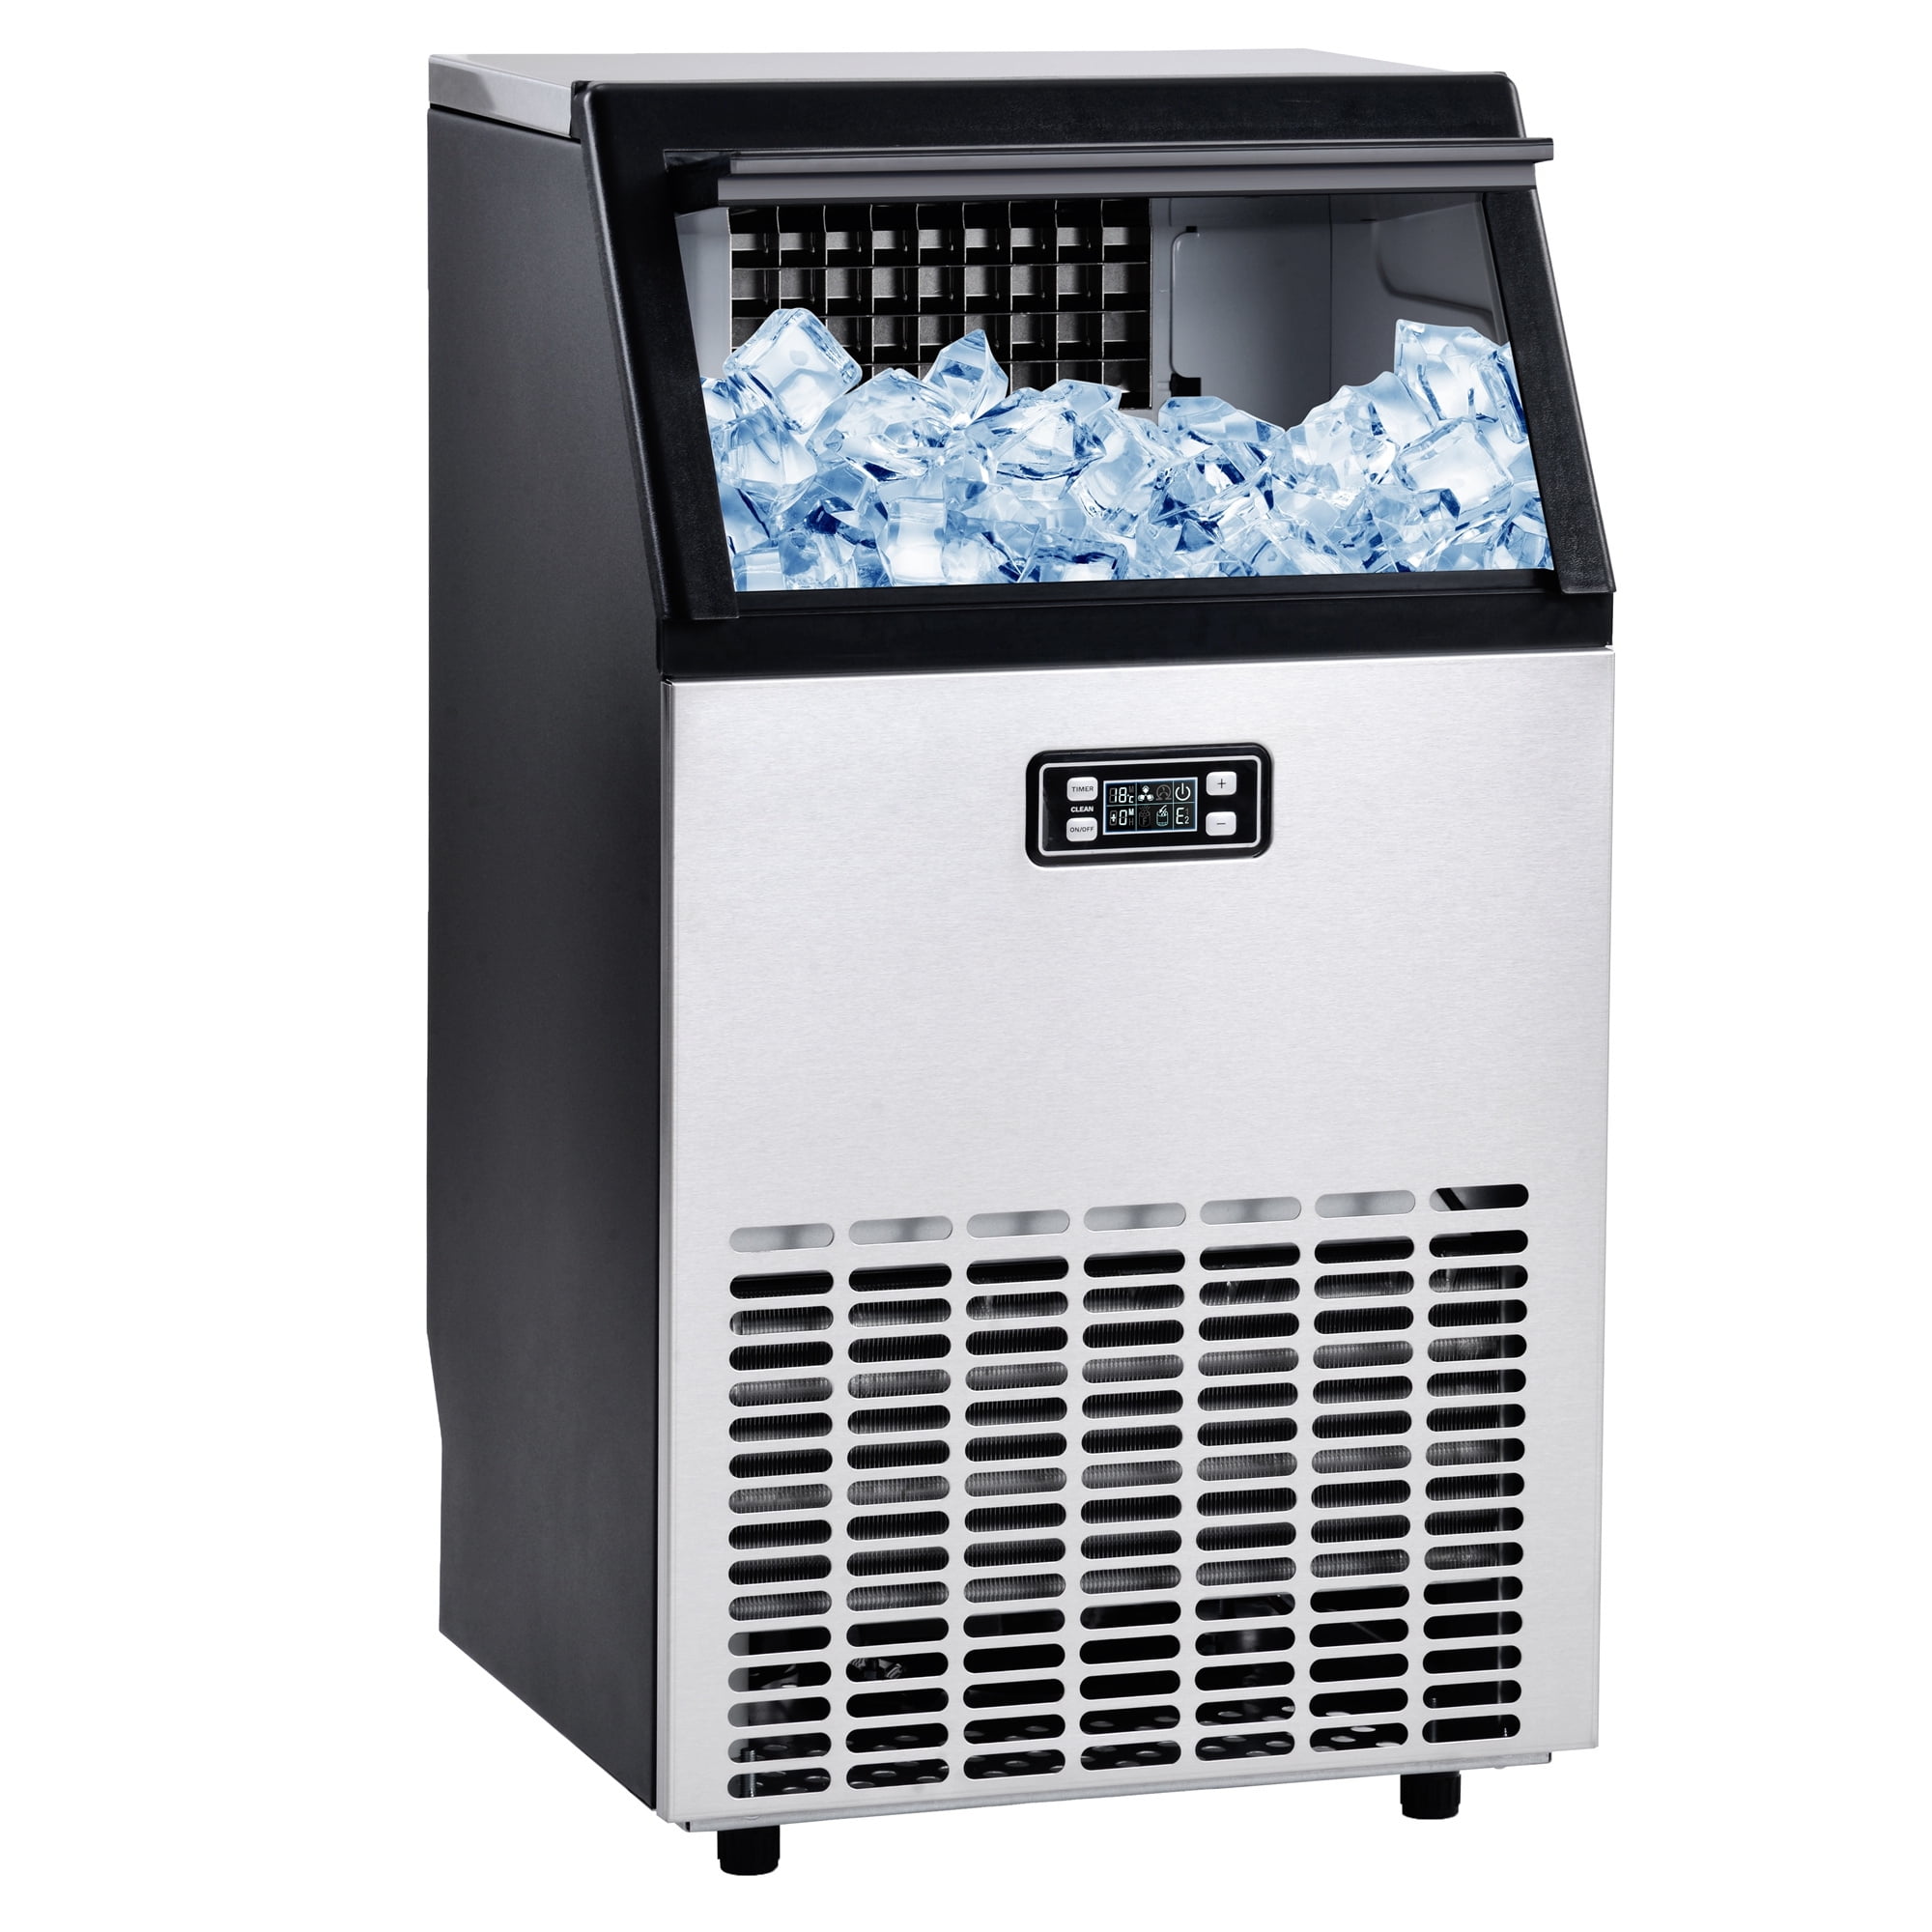 1, 90LB PRIBCHO Freestanding Commercial Ice Maker Machine,Makes 90 Pounds Ice in 24 hrs with 22 Pounds Storage Capacity,Stainless Steel Industrial Freestanding Ice Maker,Under Counter ice Maker 